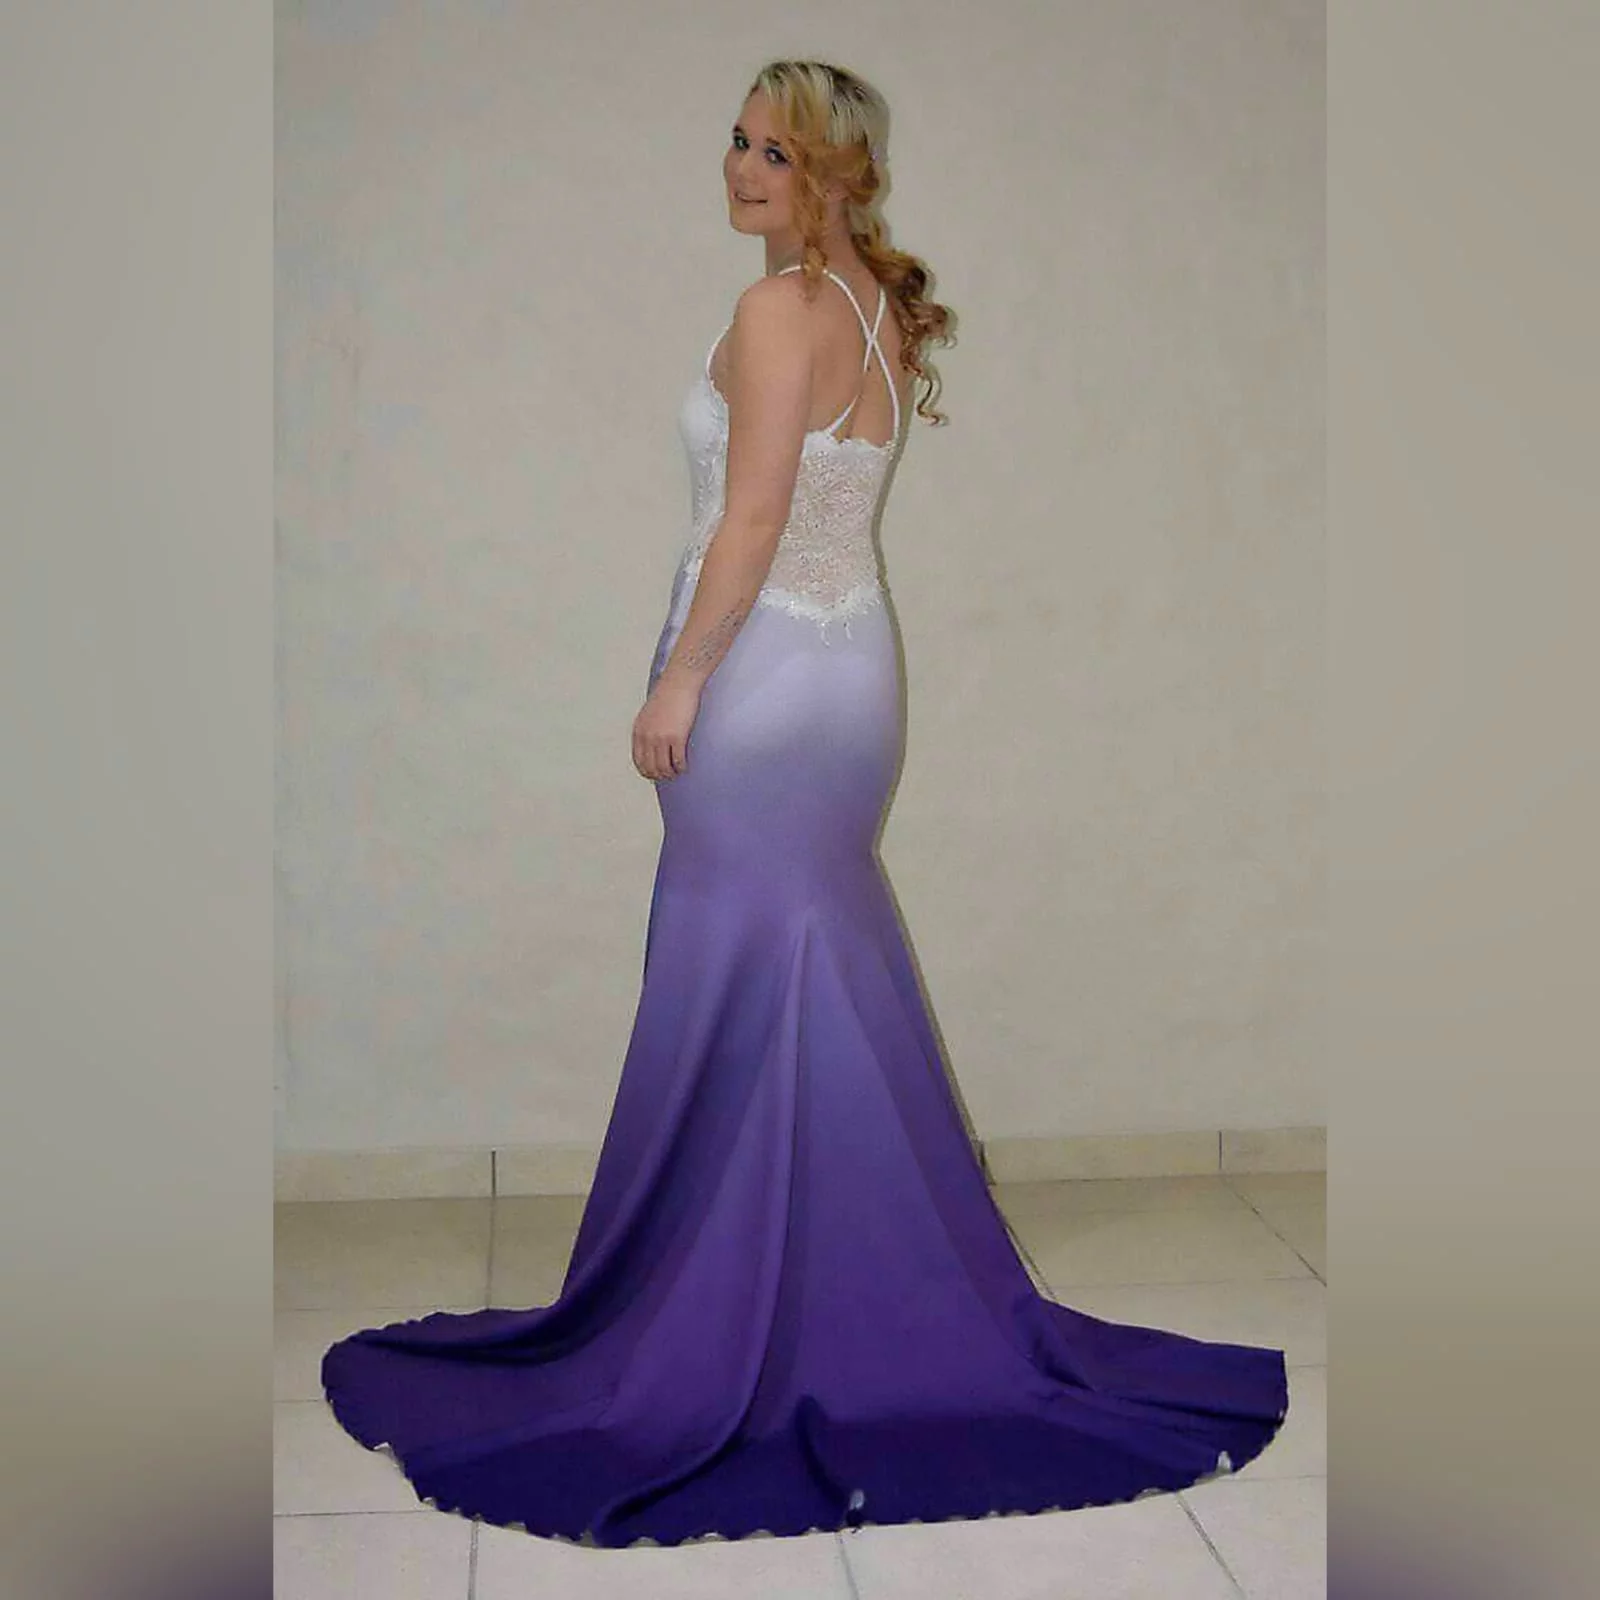 White & purple ombre soft mermaid prom dress 8 white & purple ombre soft mermaid prom dress with a sheer lace back. A sweetheart neckline. With a touch of silver beads and a train.